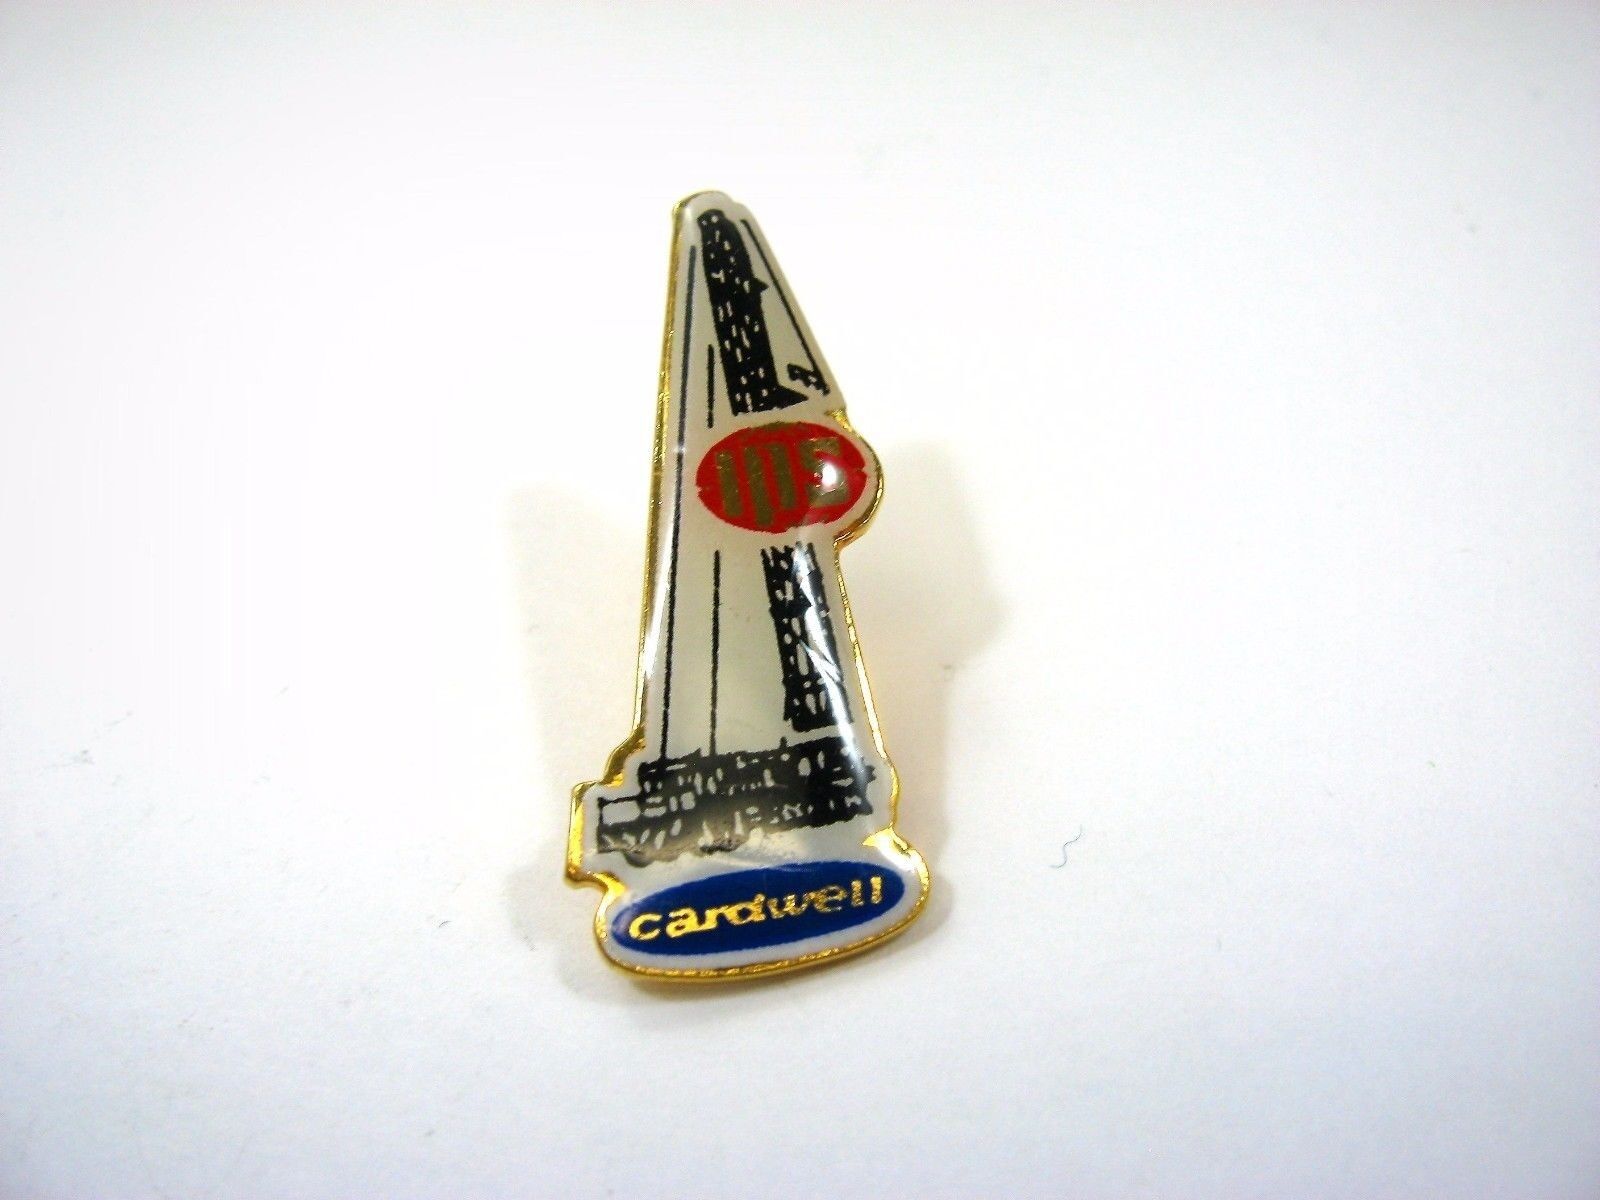 Vintage Collectible Pin: Cardwell IPS Drilling Workover Rig